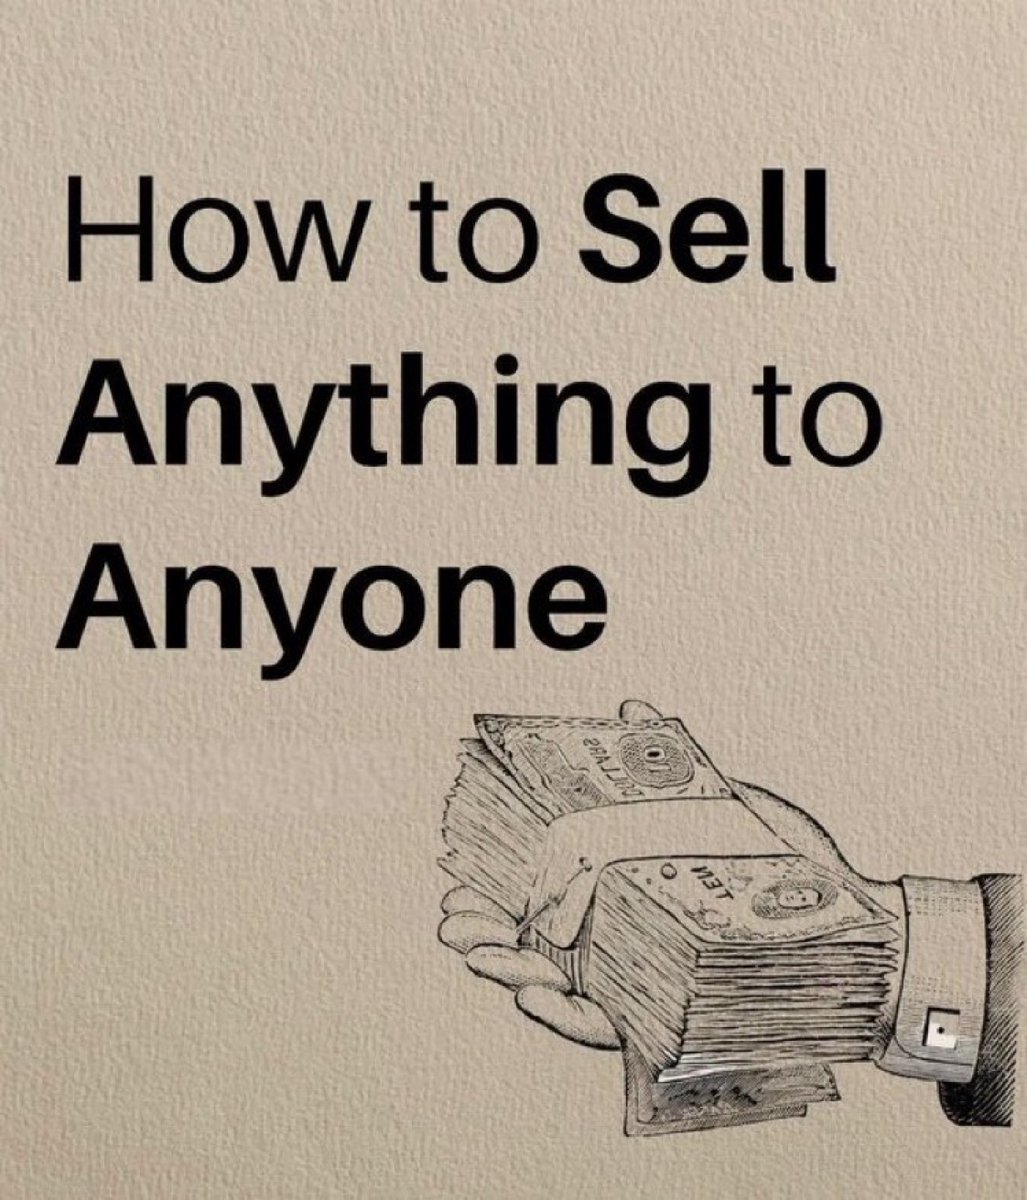 6 Killer Hacks to Sell Anything to Anyone:

- Thread -